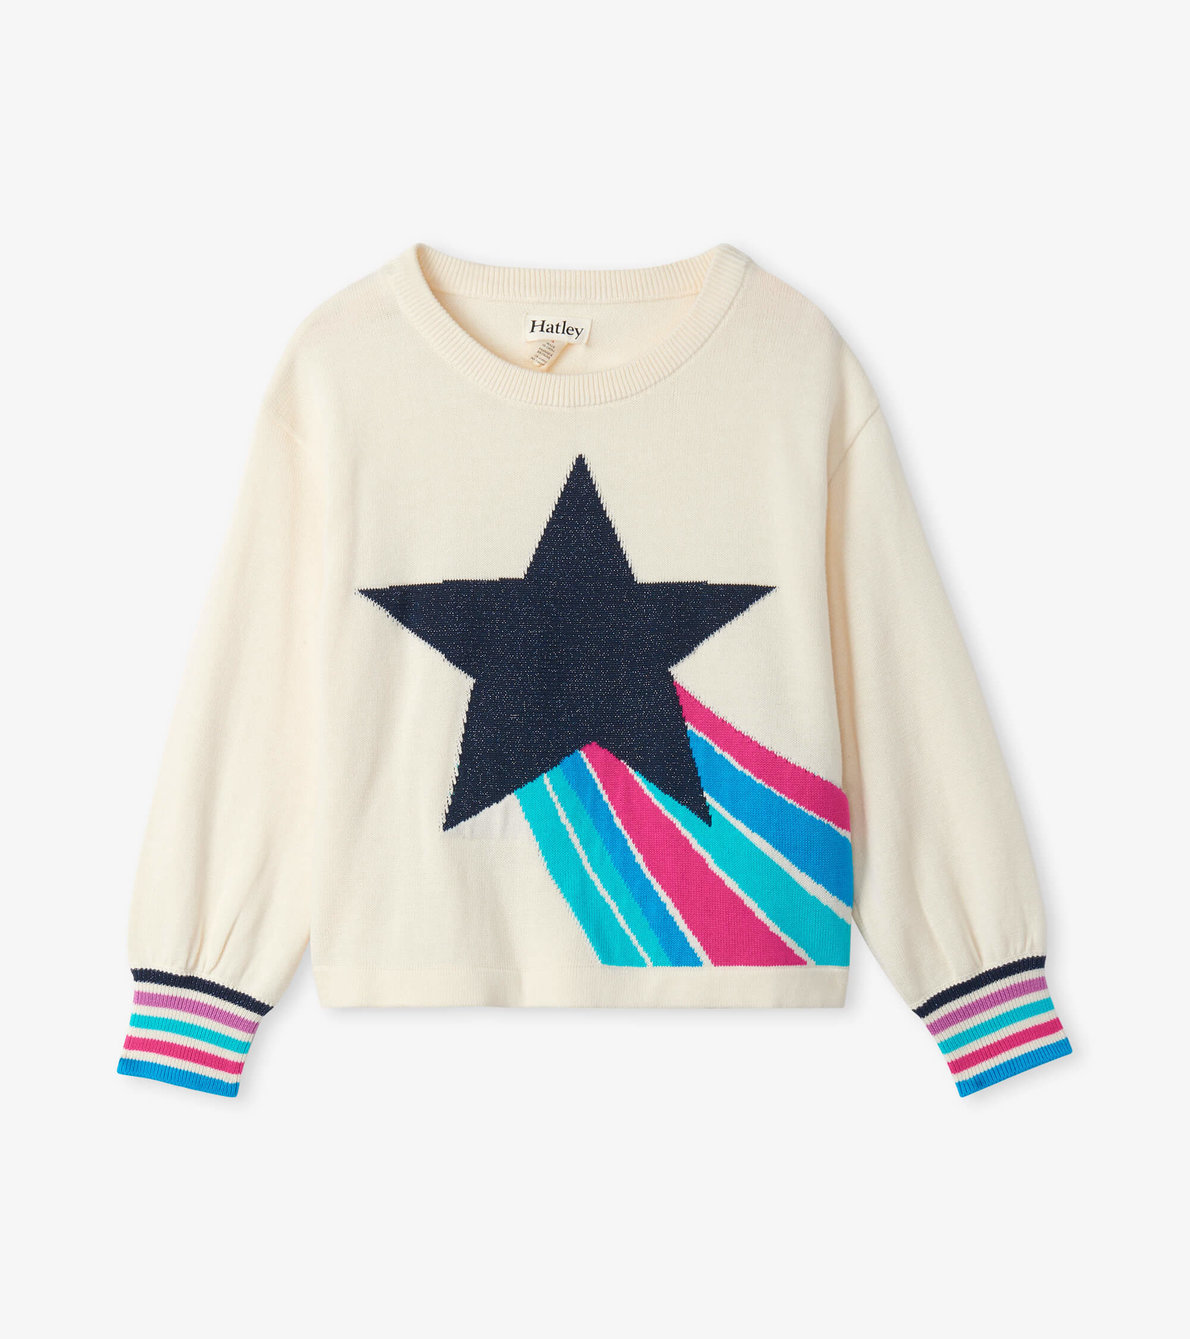 View larger image of Girls Shooting Star Sweater